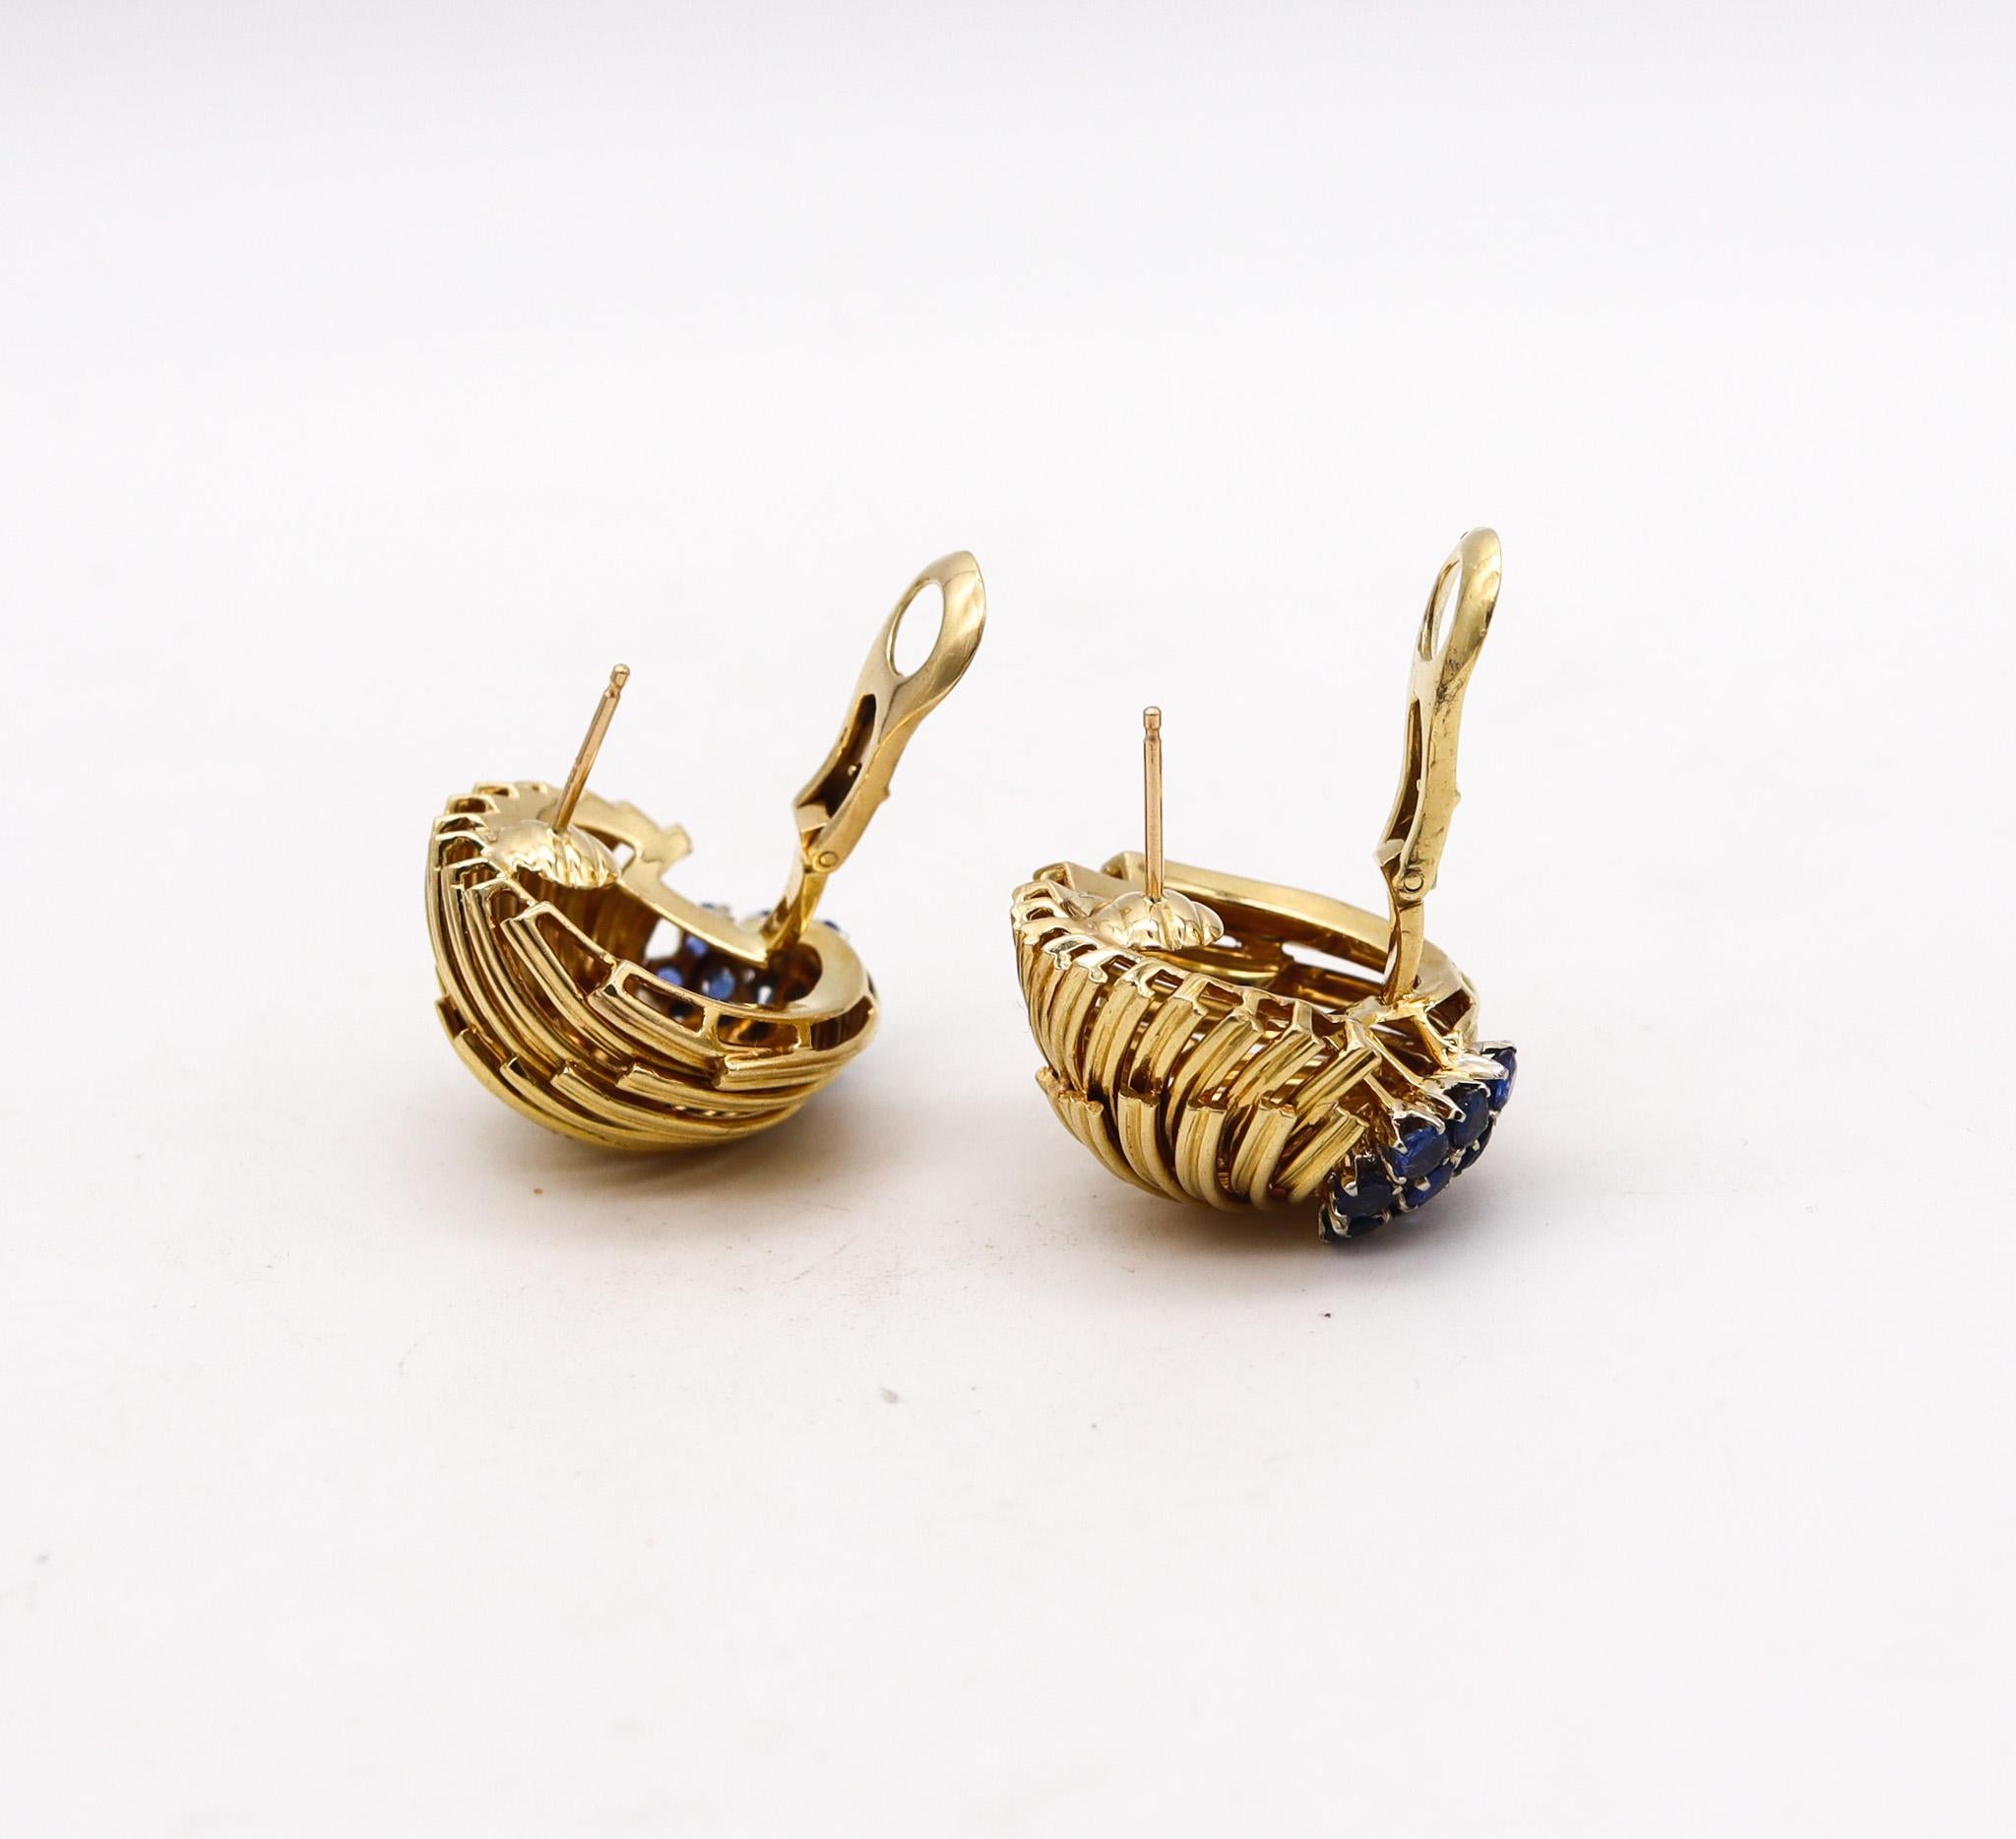 Modernist David Balogh 1960 Ear Clips In 18Kt Yellow Gold With 2.04 Ctw In Blue Sapphires For Sale